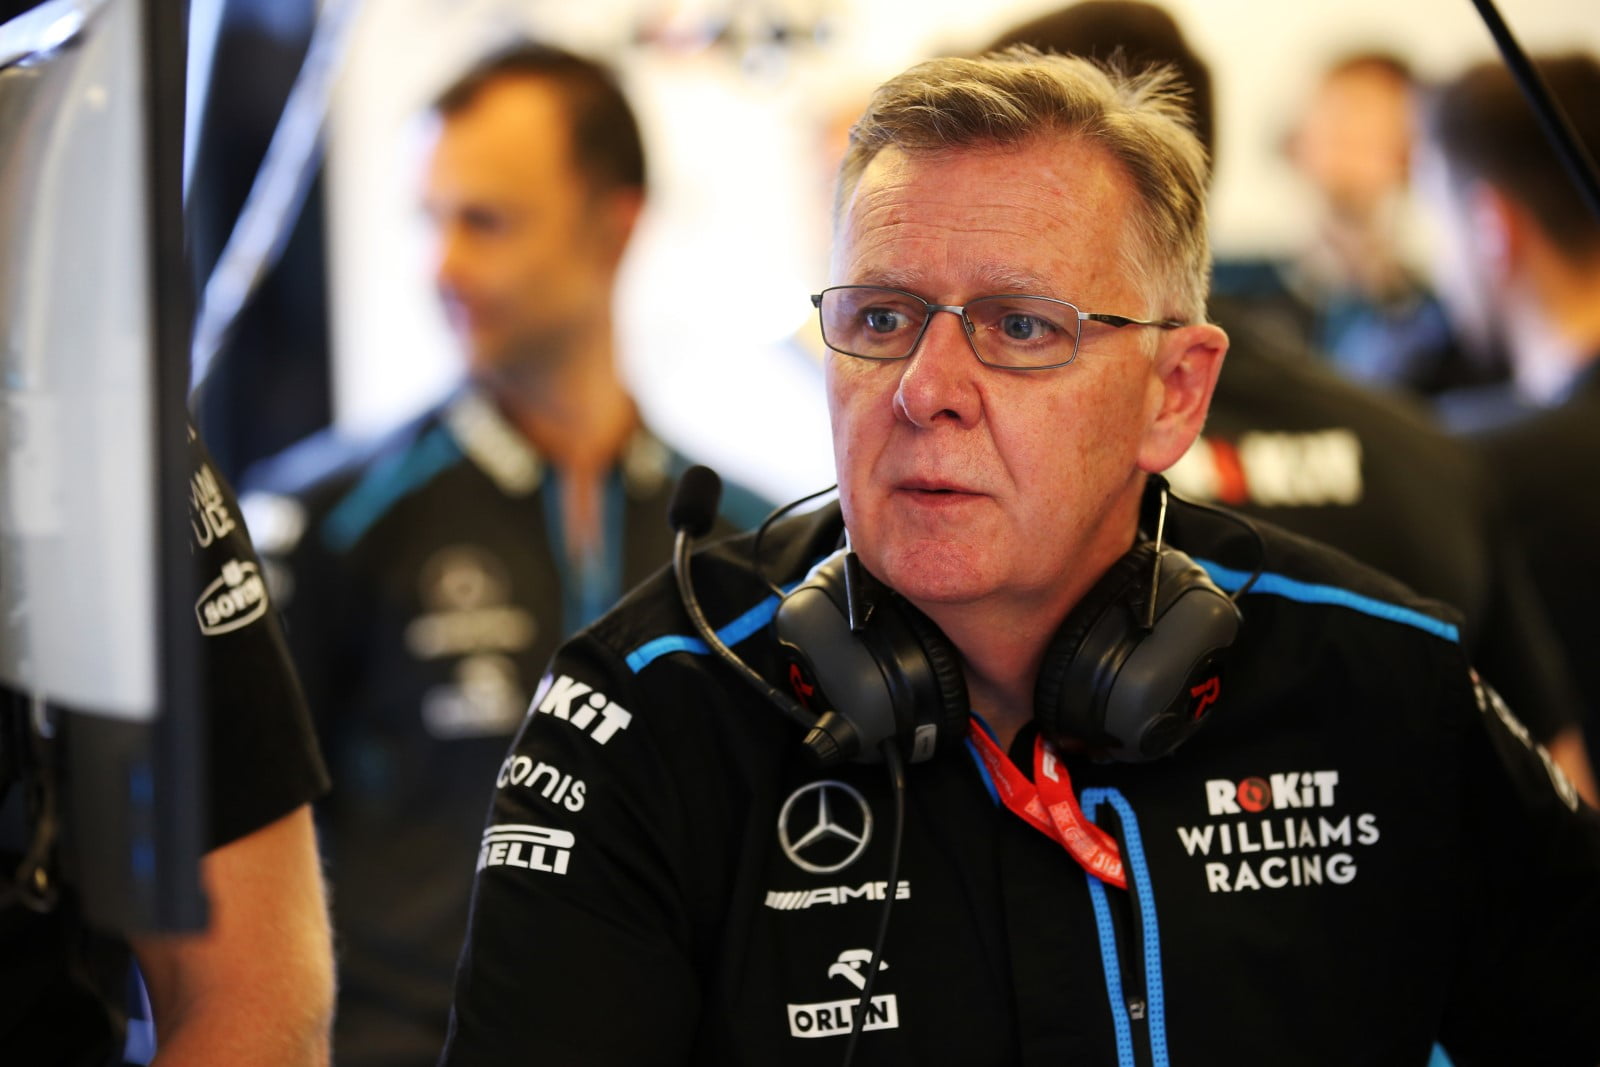 Williams CEO Mike O'Driscoll announces retirement from the team